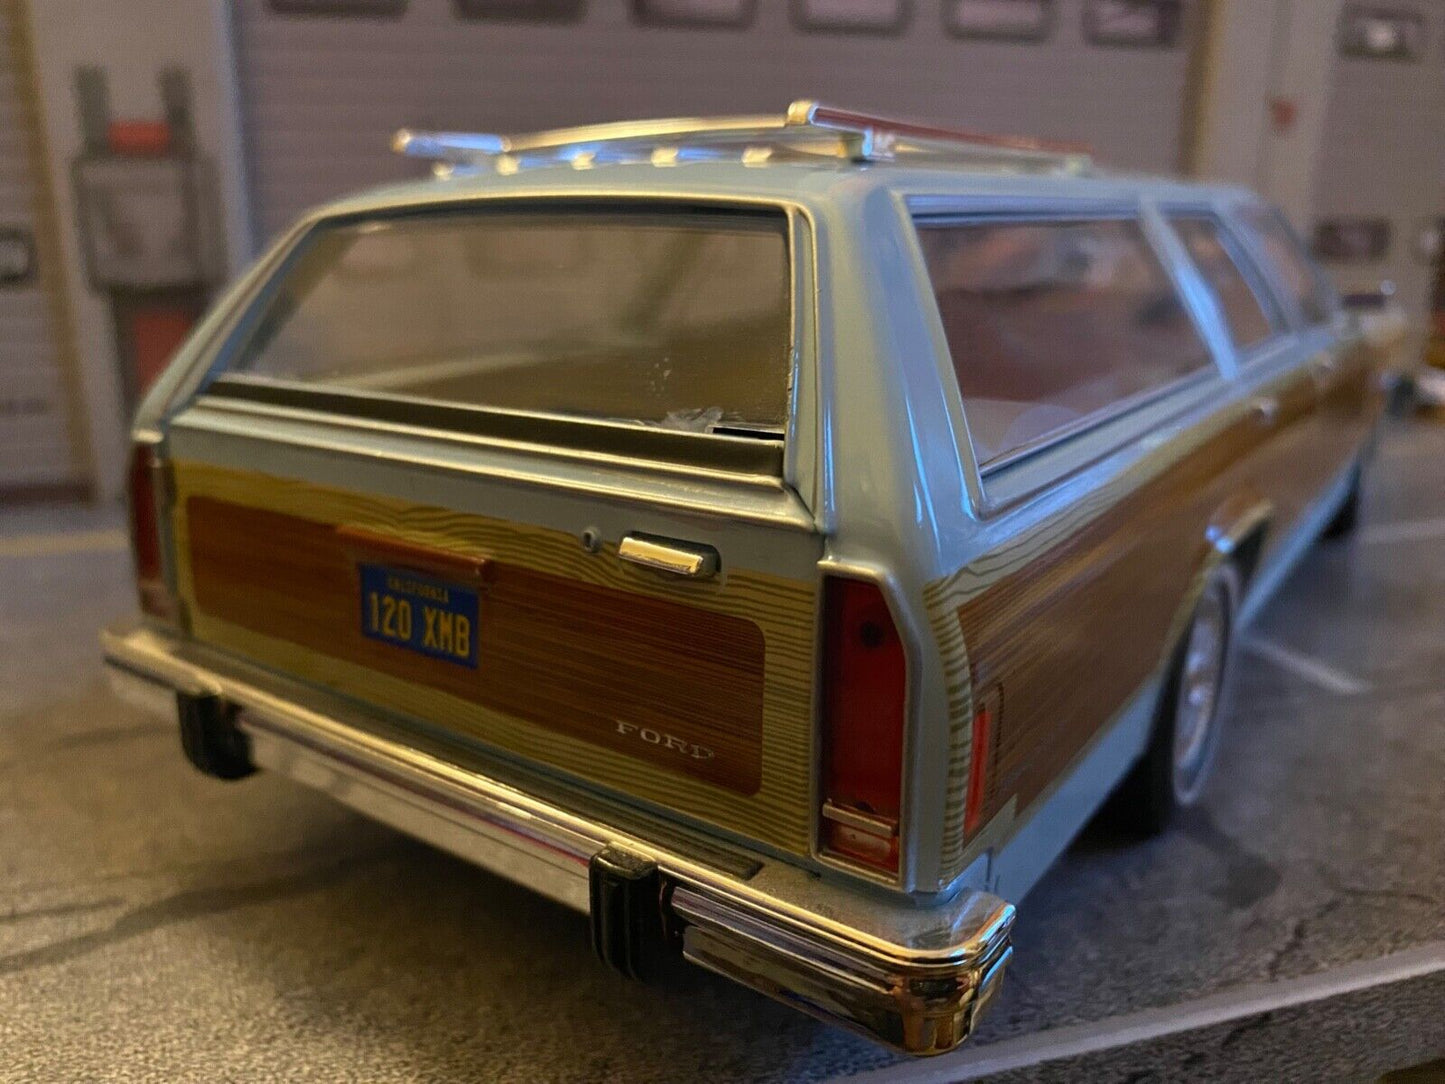 Ford LTD Country Squire 1979 Charlie's Angles Greenlight 19066 1:18